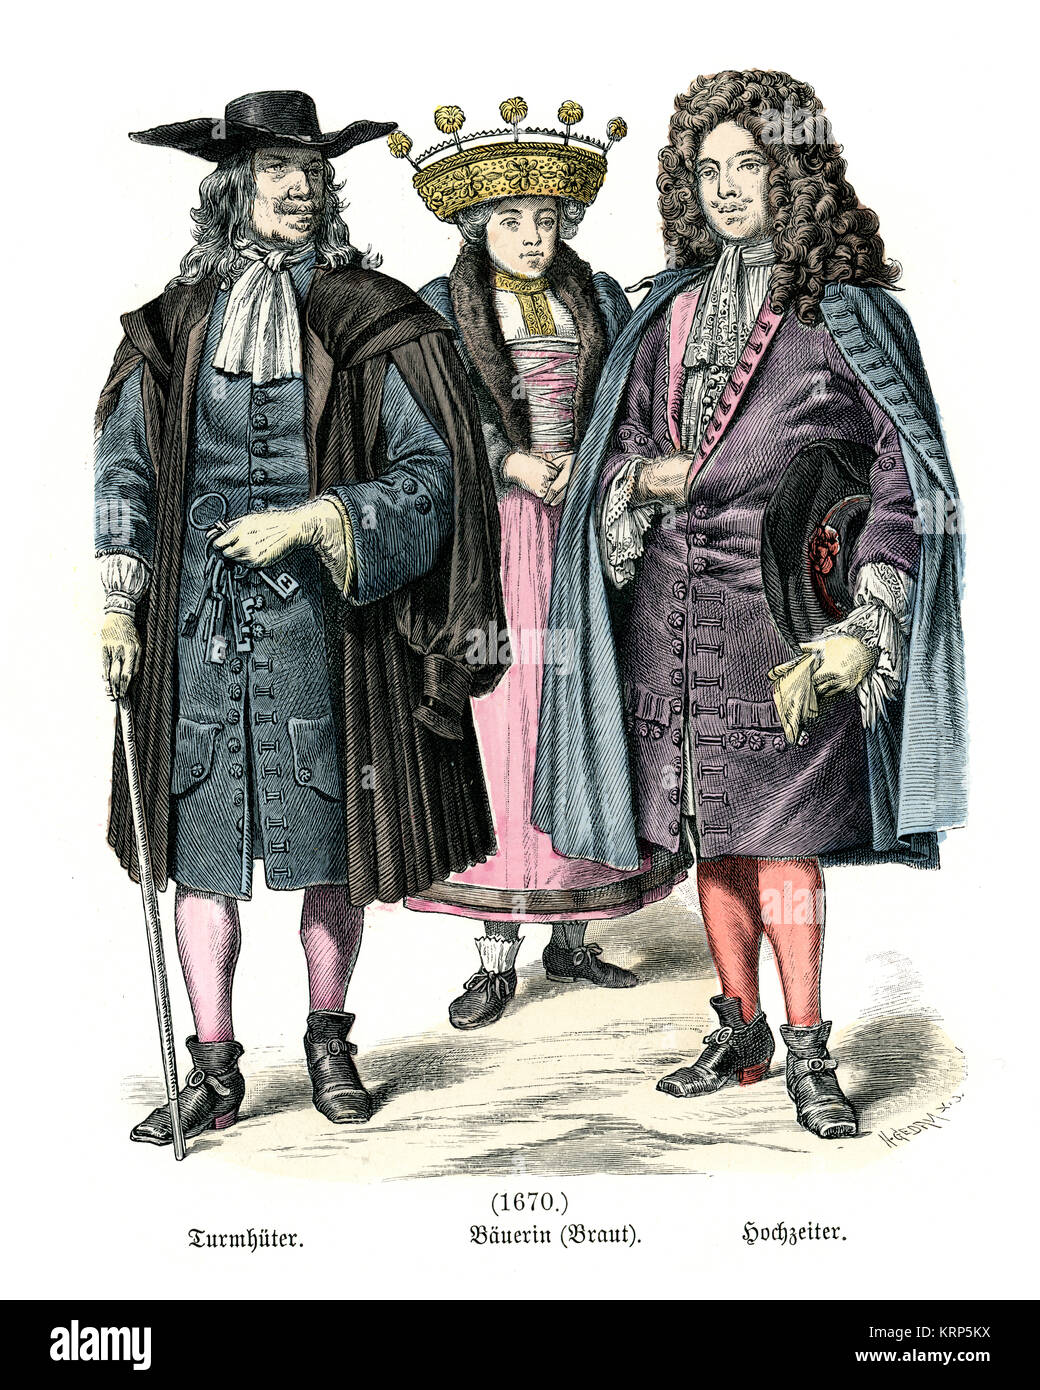 Vintage engraving of Fashions of 17th Century Strasbourg. Watchman of the tower, peasant bride, bridegroom Stock Photo